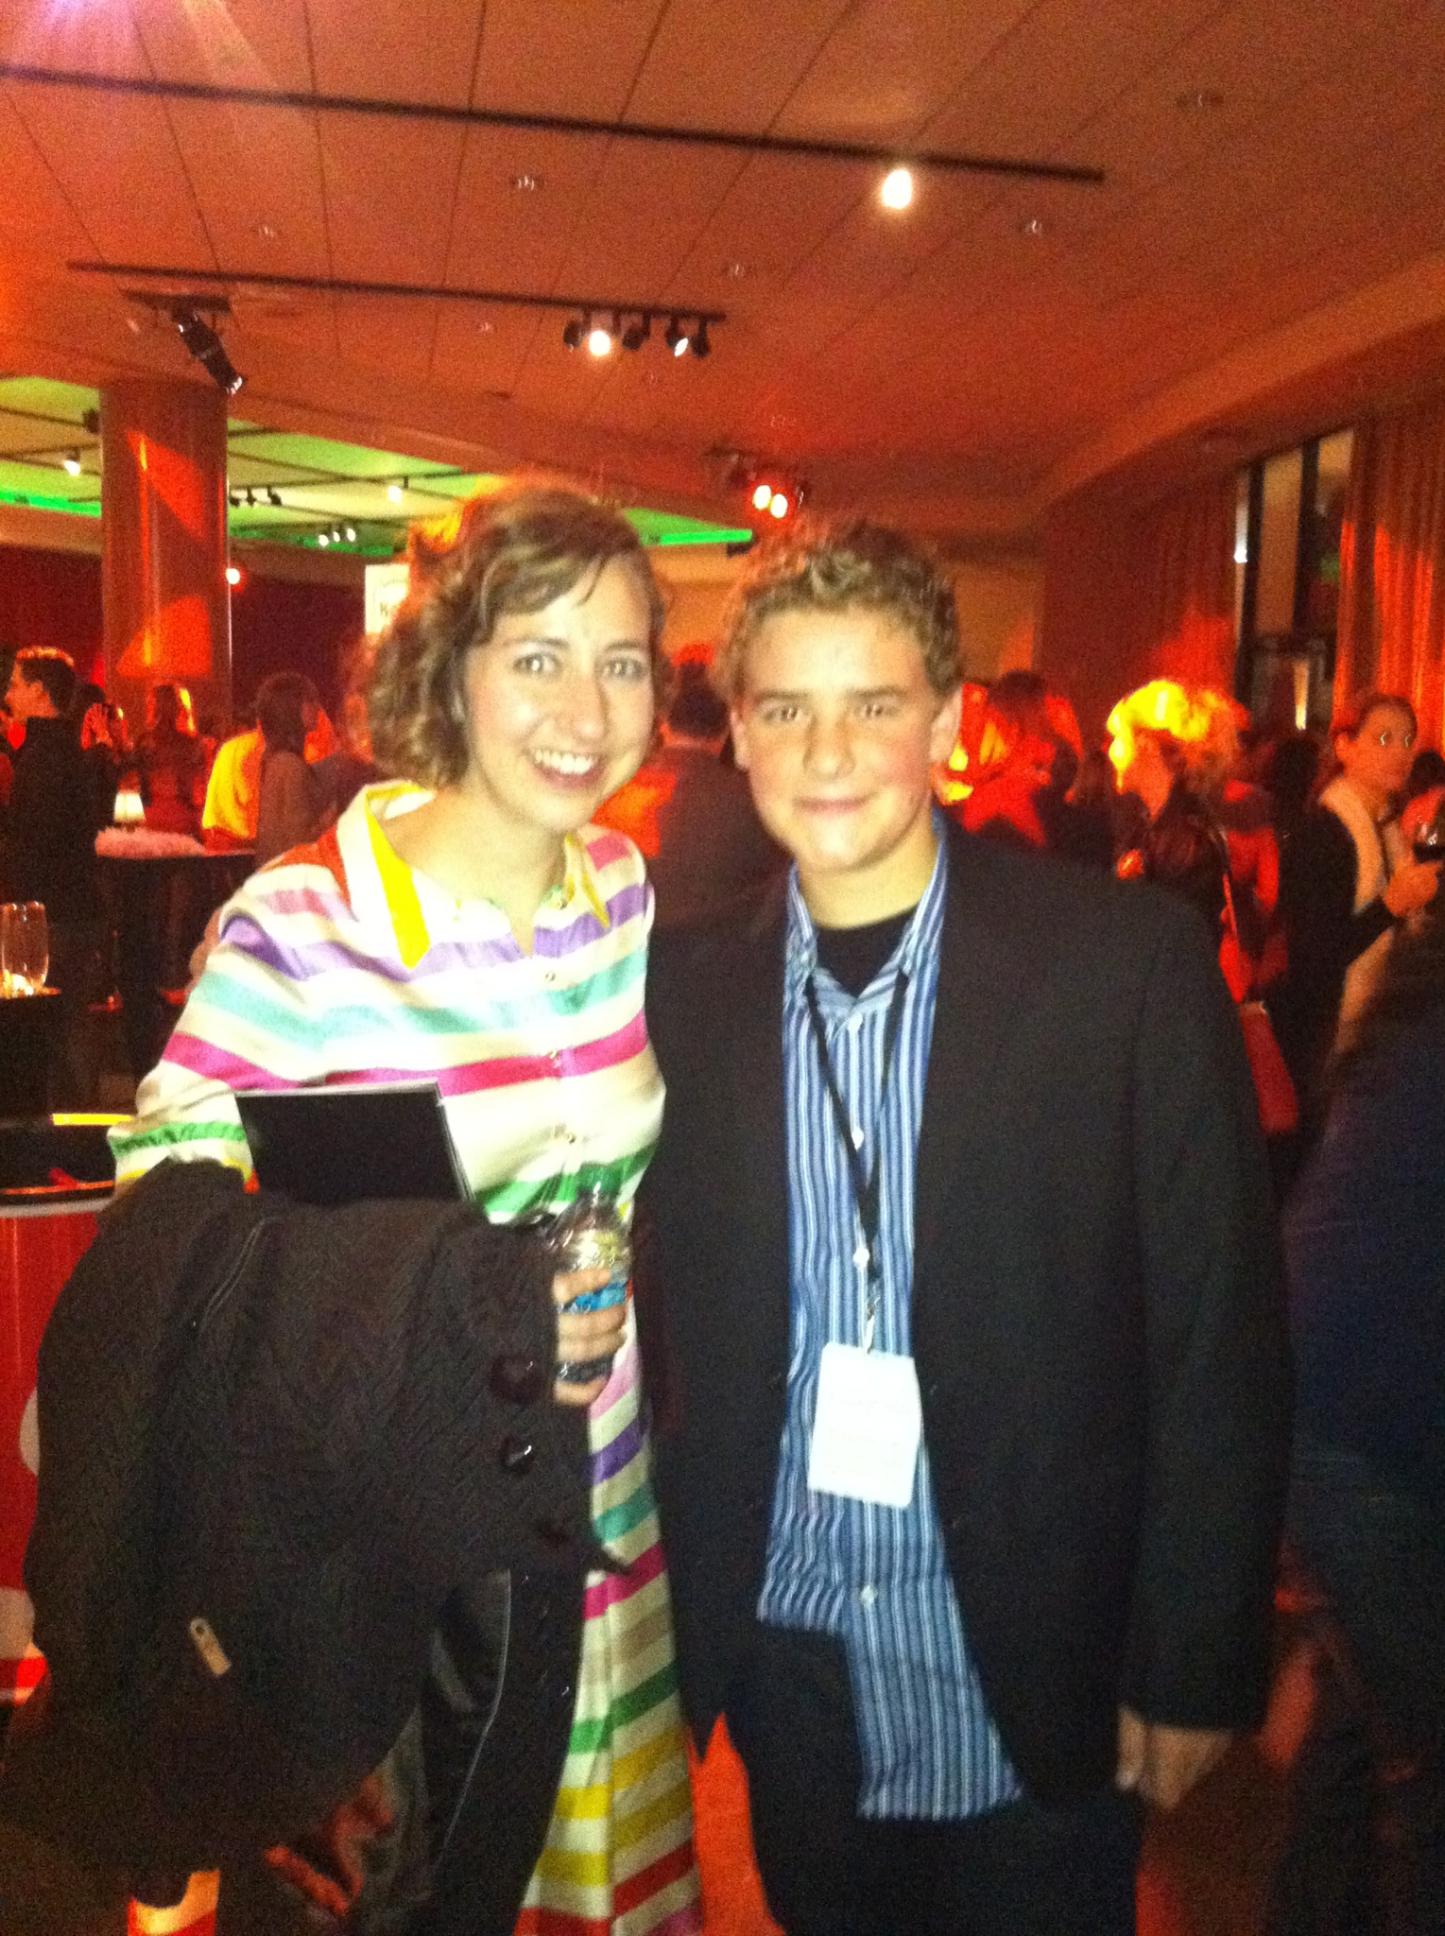 Justin with Kristen Schaal at the Muppet premier